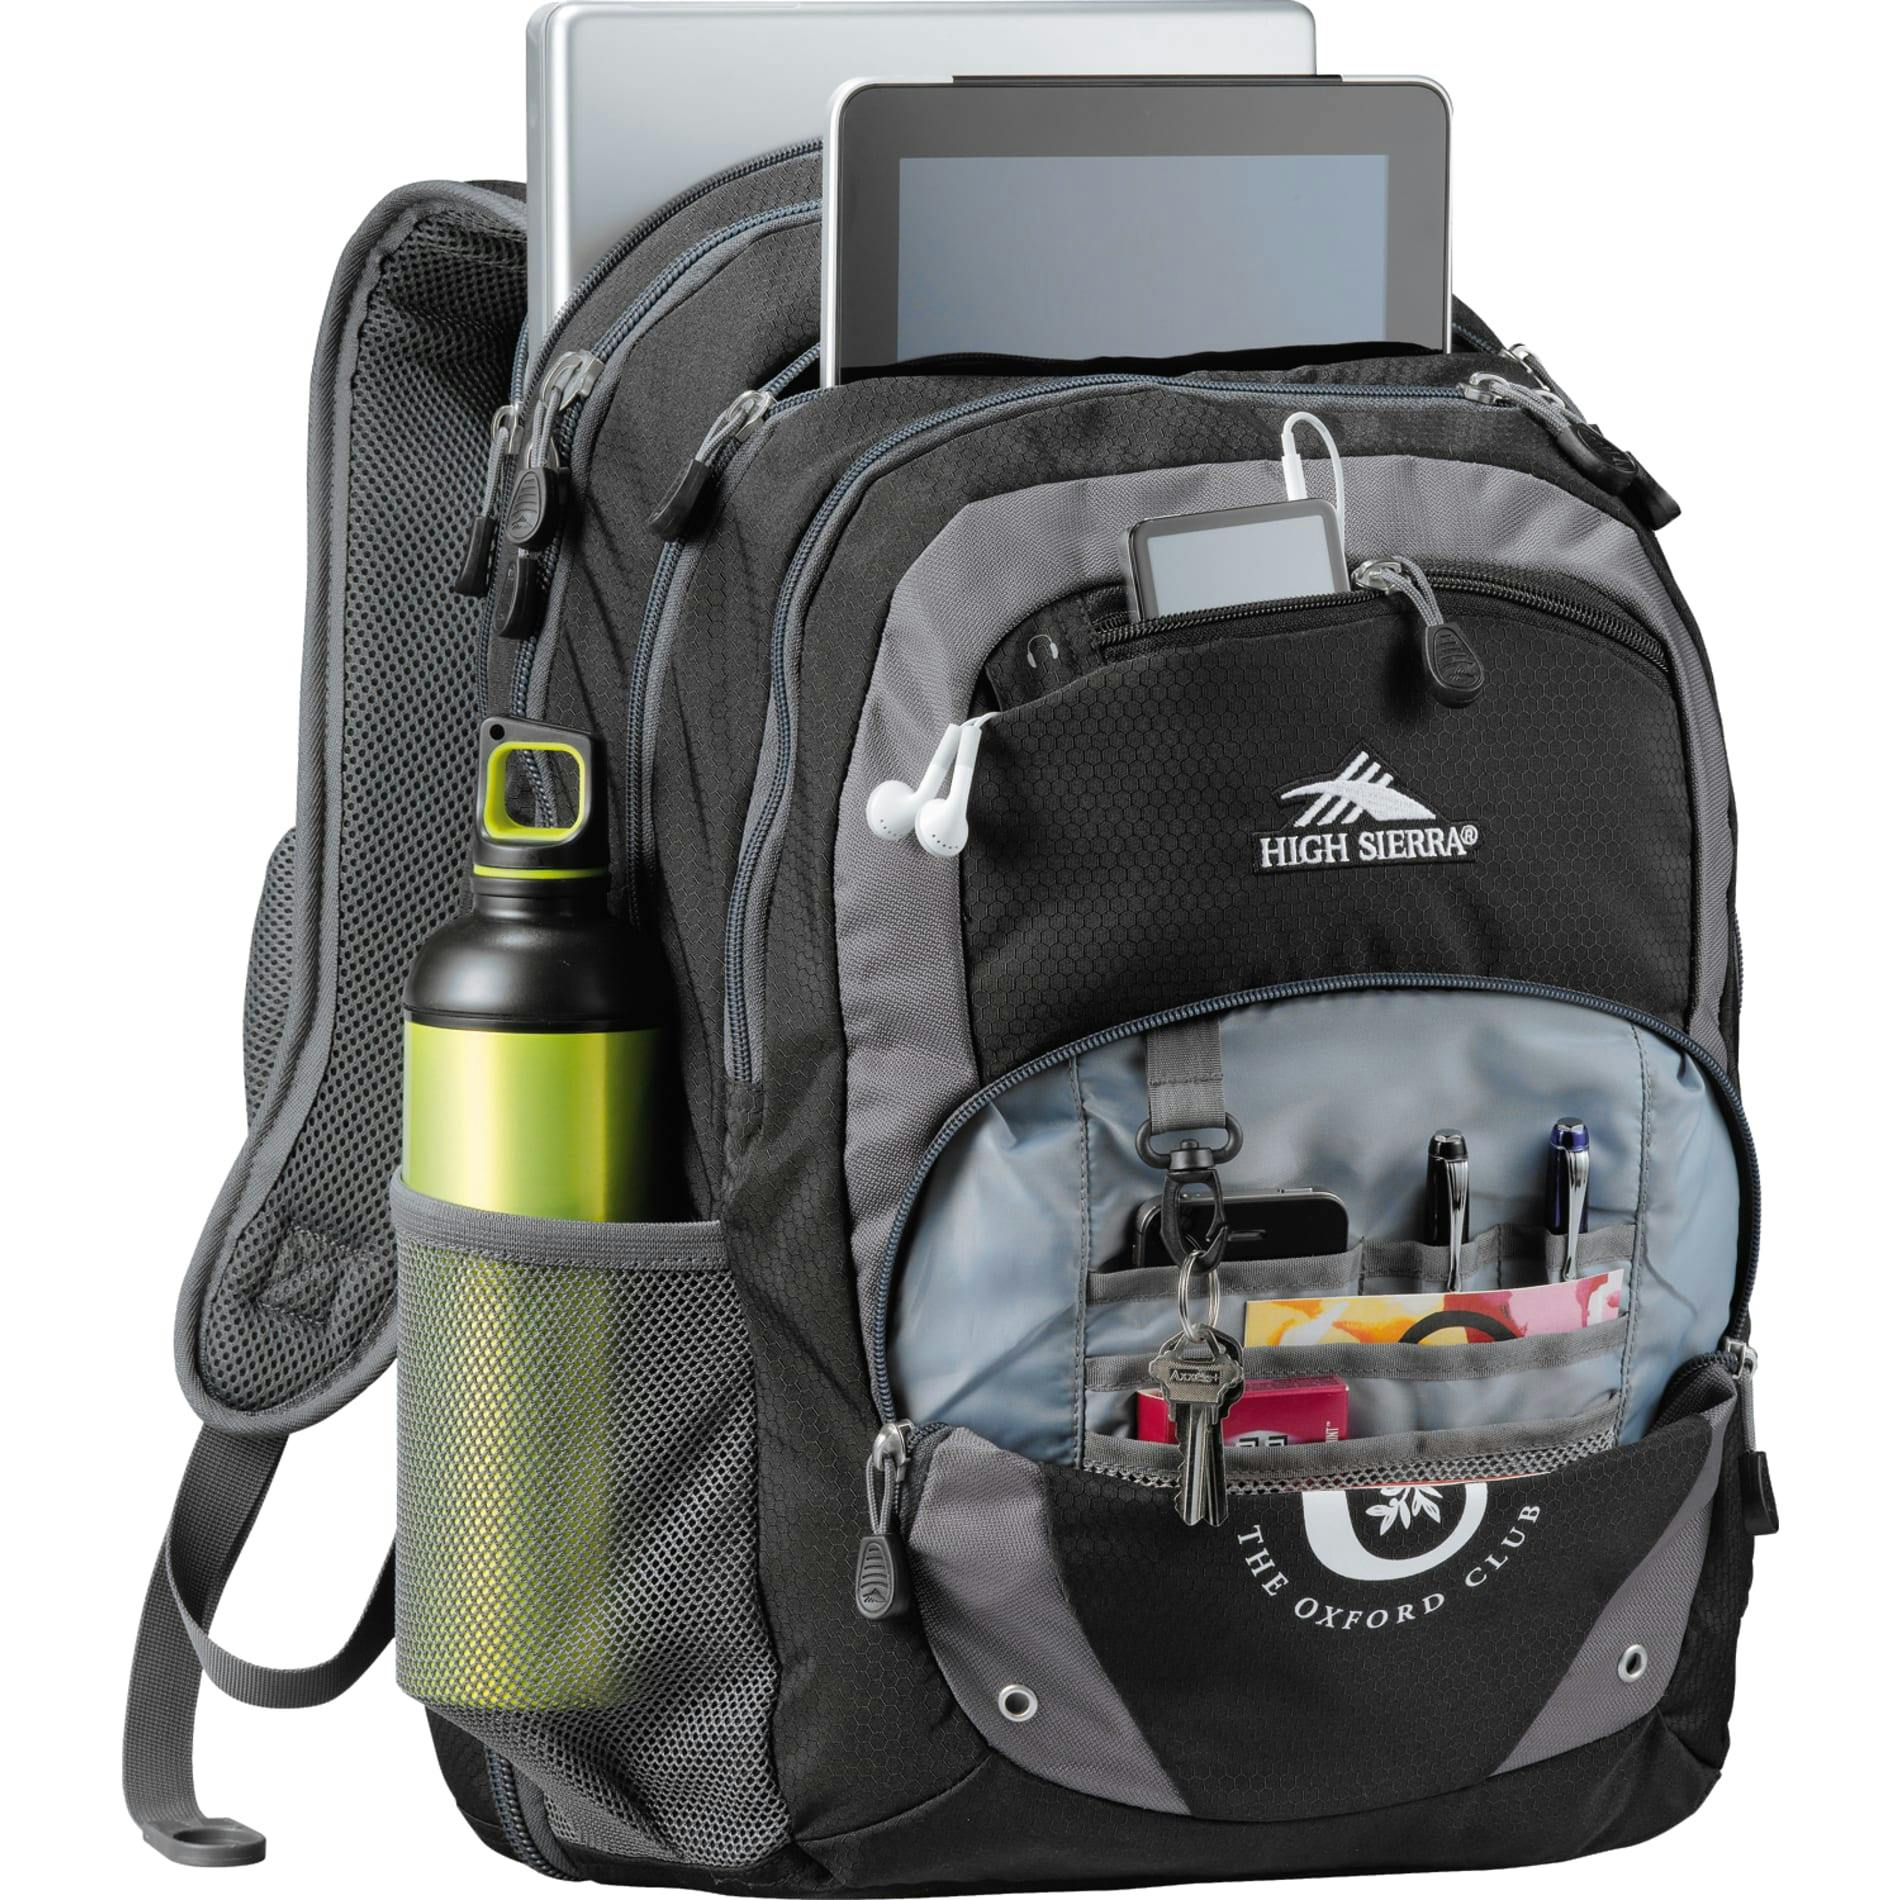 High Sierra Overtime Fly-By 17" Computer Backpack - additional Image 2